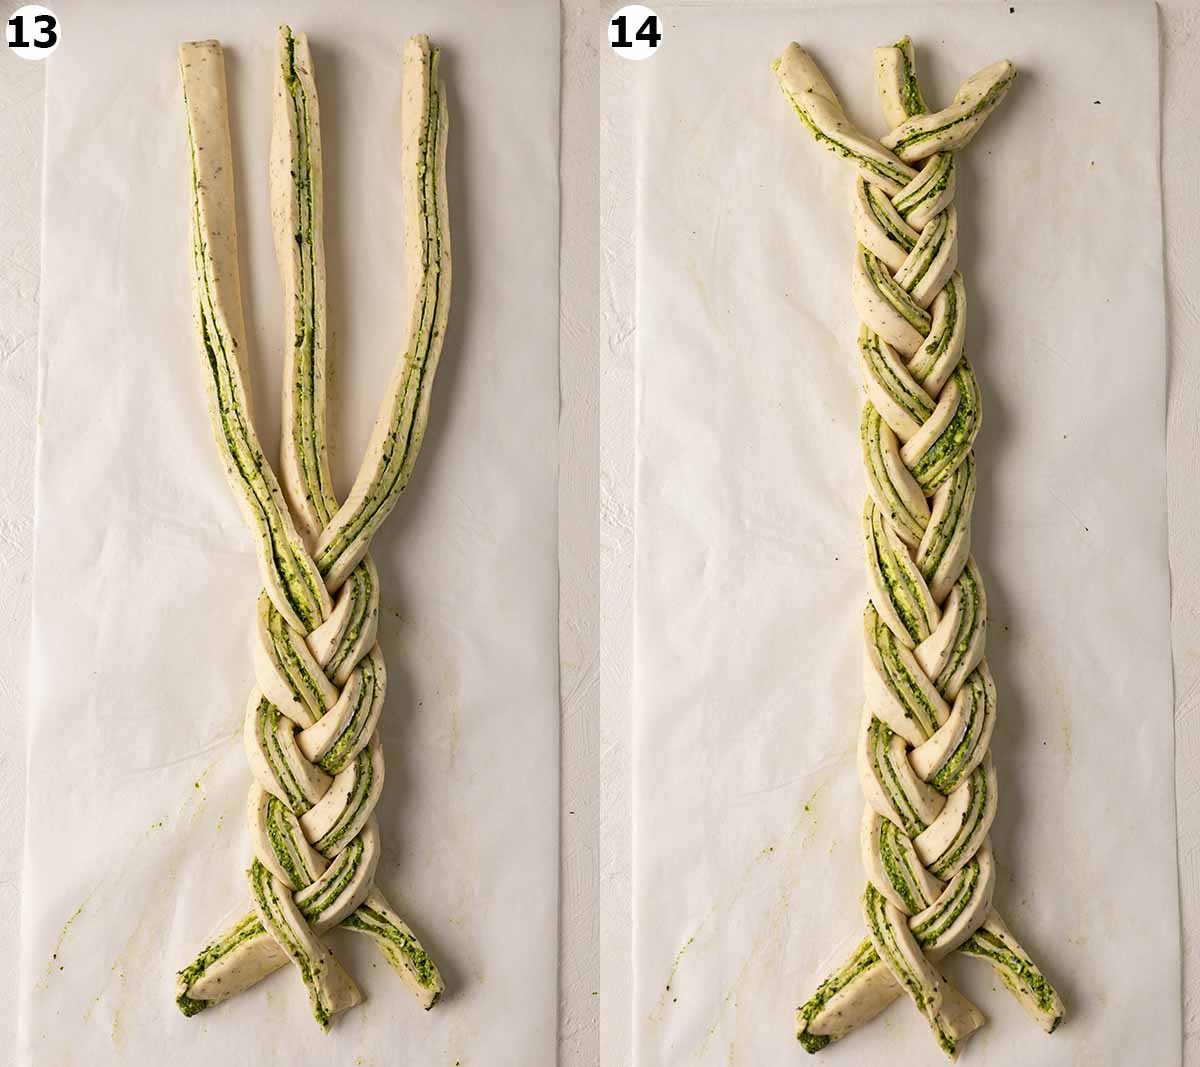 Two image collage showing half and the full dough braided.